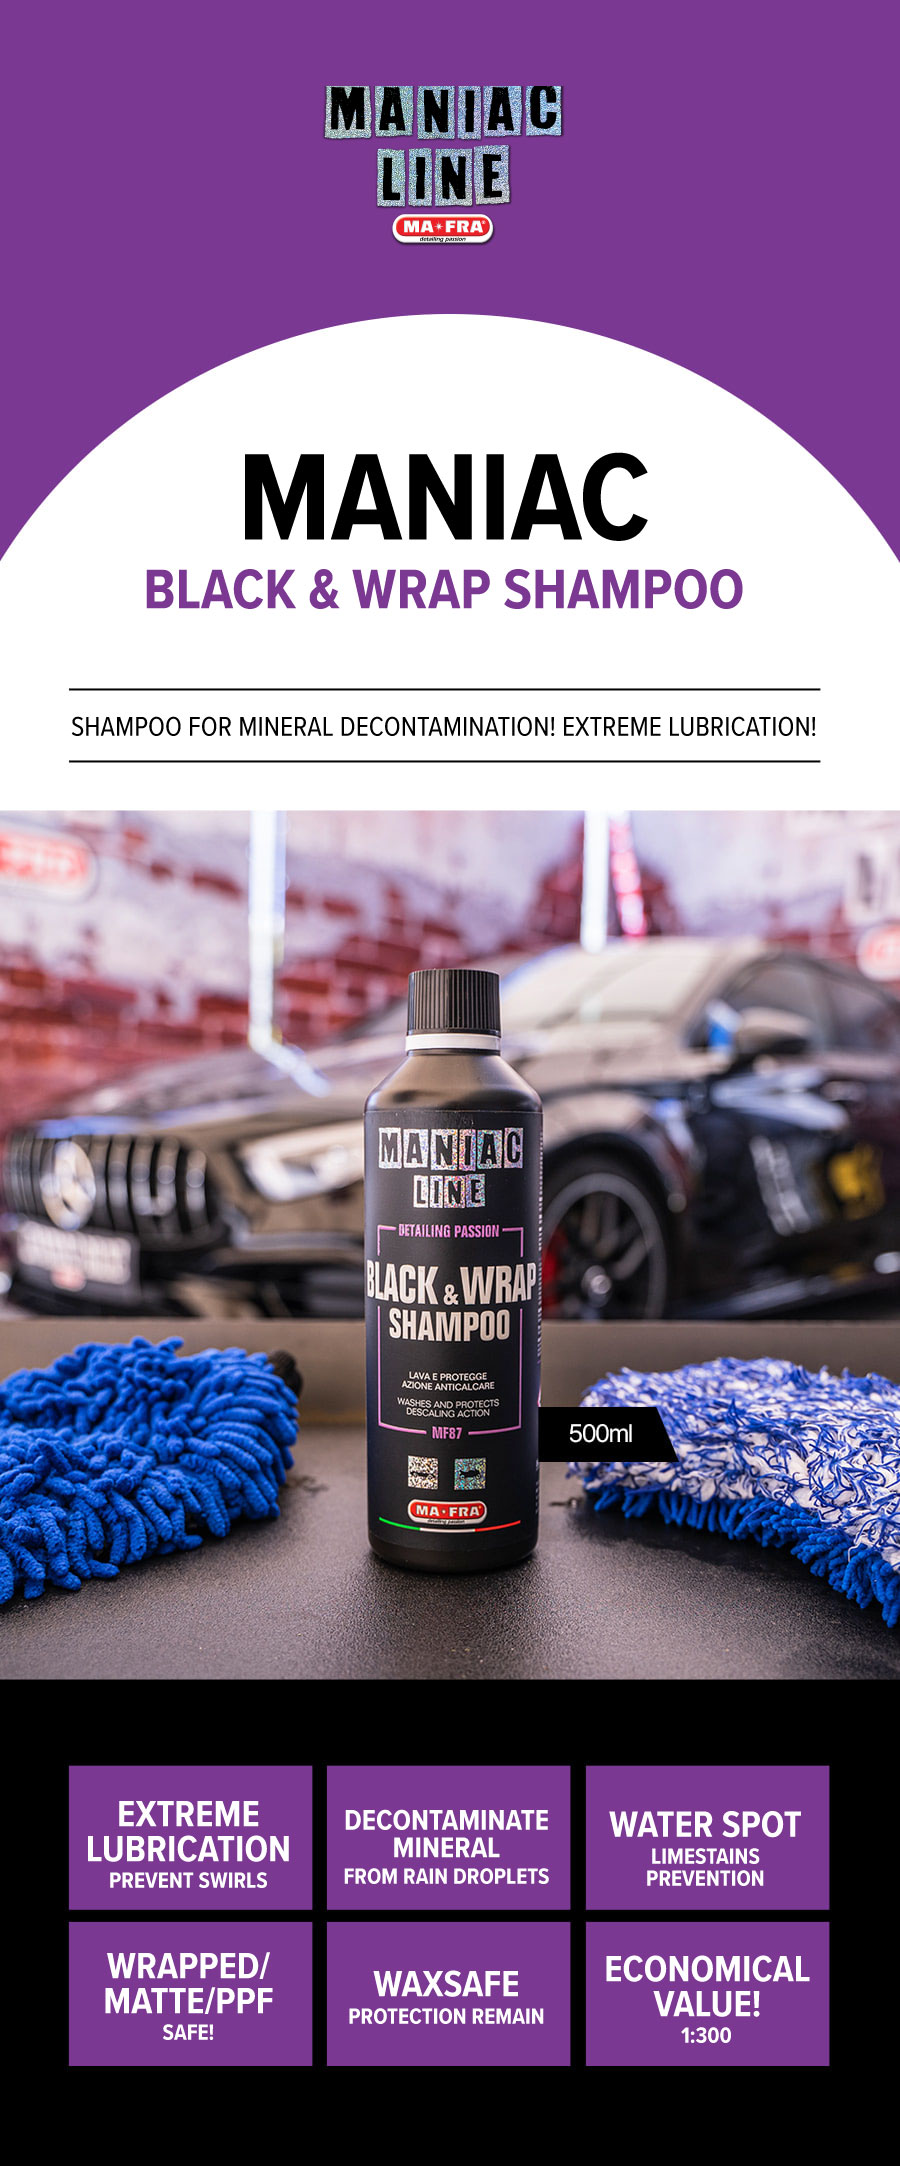 Mafra Maniac Line Black and Wrap Shampoo 500ml (Special formulated 2 in 1 Revitalise Rejuvenate Anti Limescale for Dark Colour Black PPF Matte Film Coated Cars) - Mafra Official Store Singapore